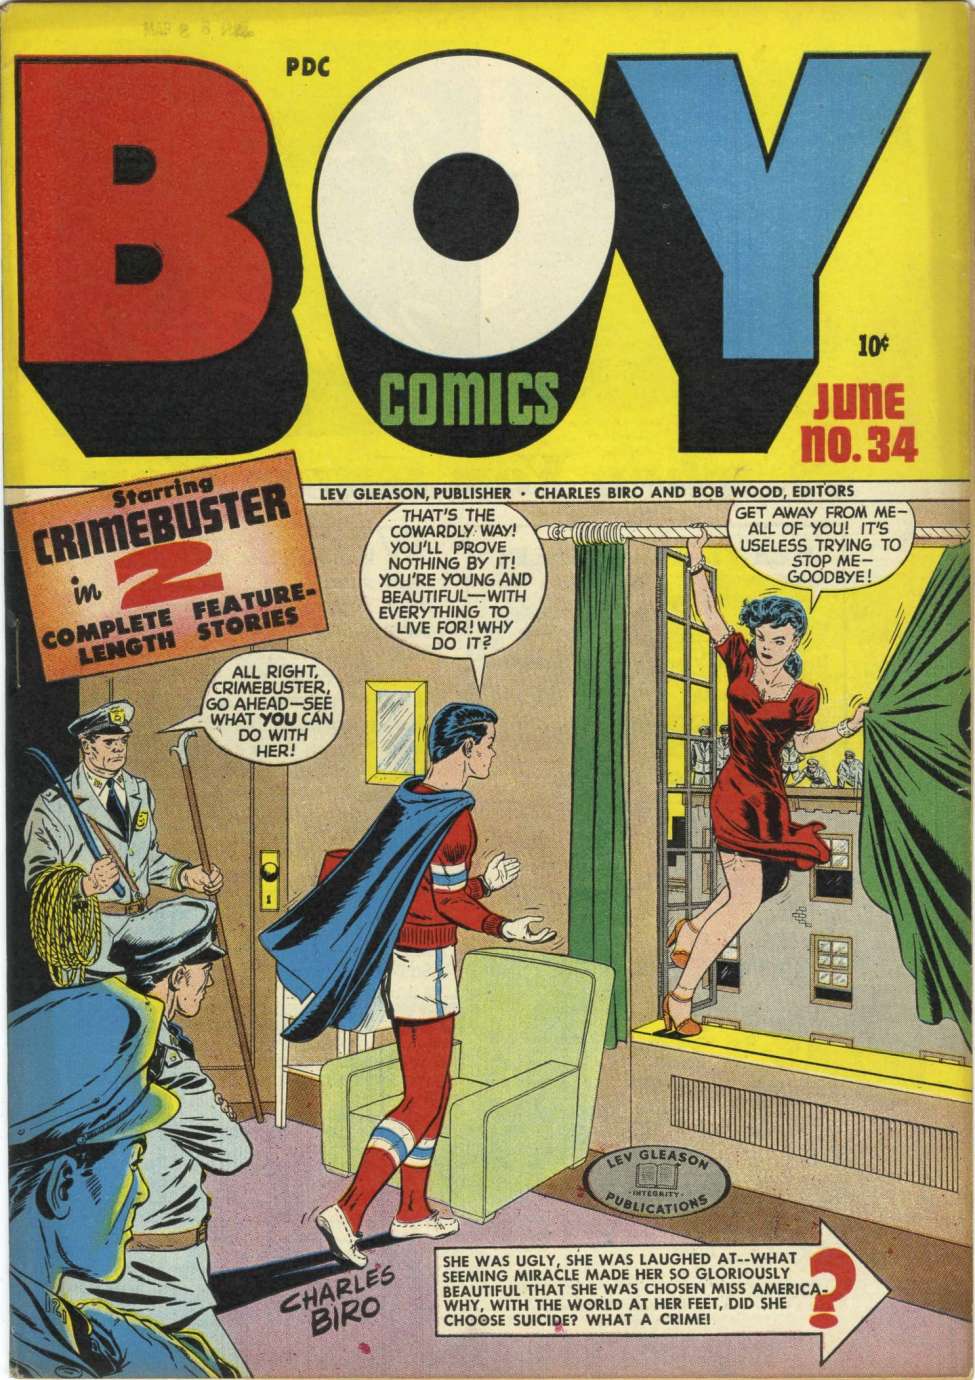 Book Cover For Boy Comics 34